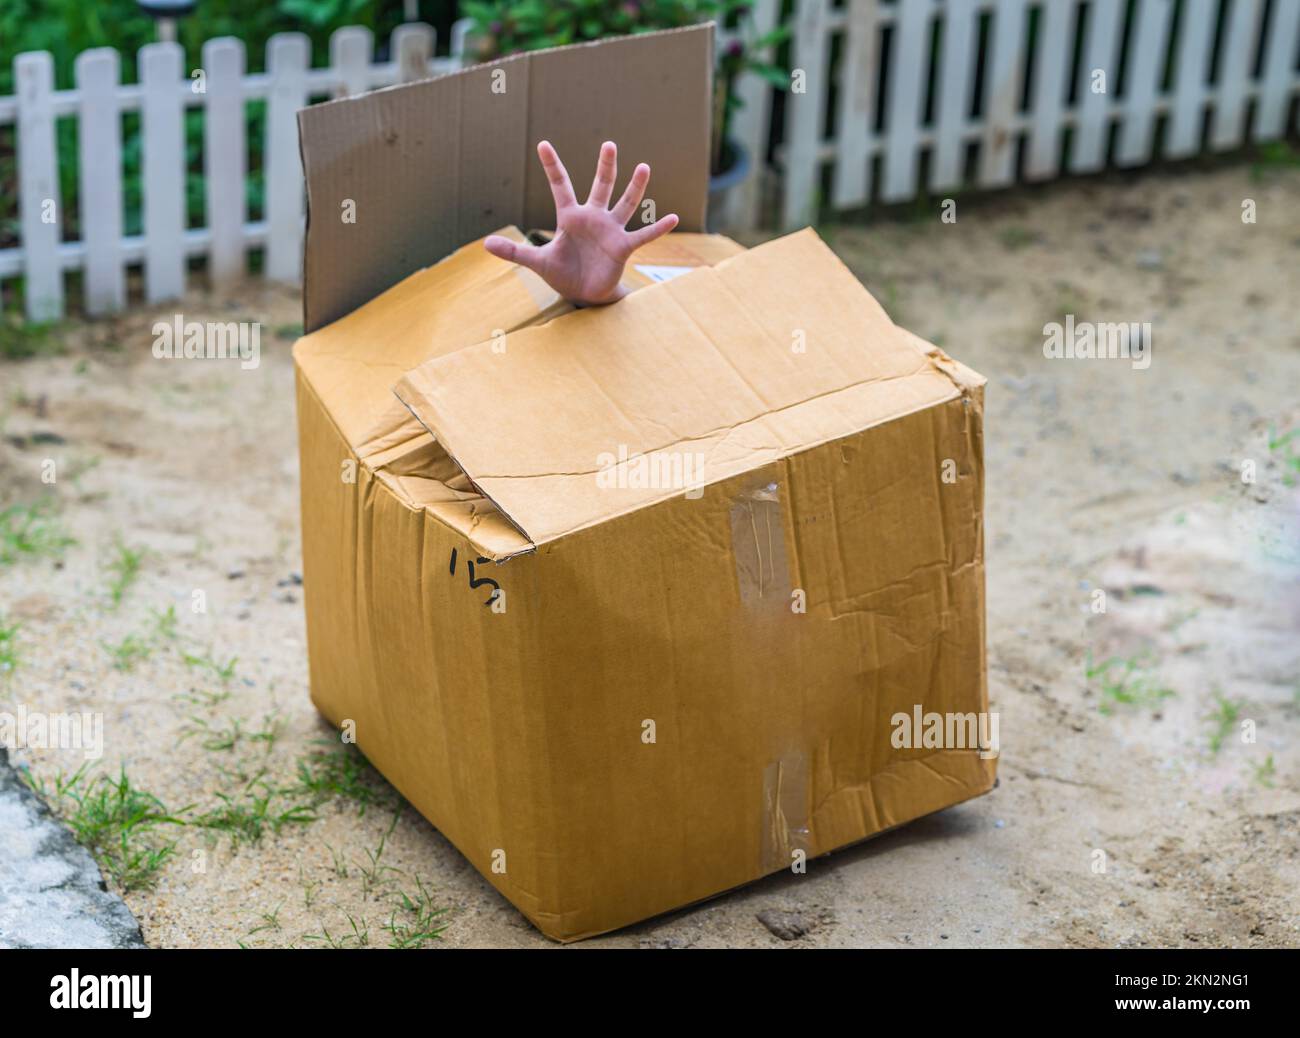 A scary had sticking out of a cardboard box. Stock Photo